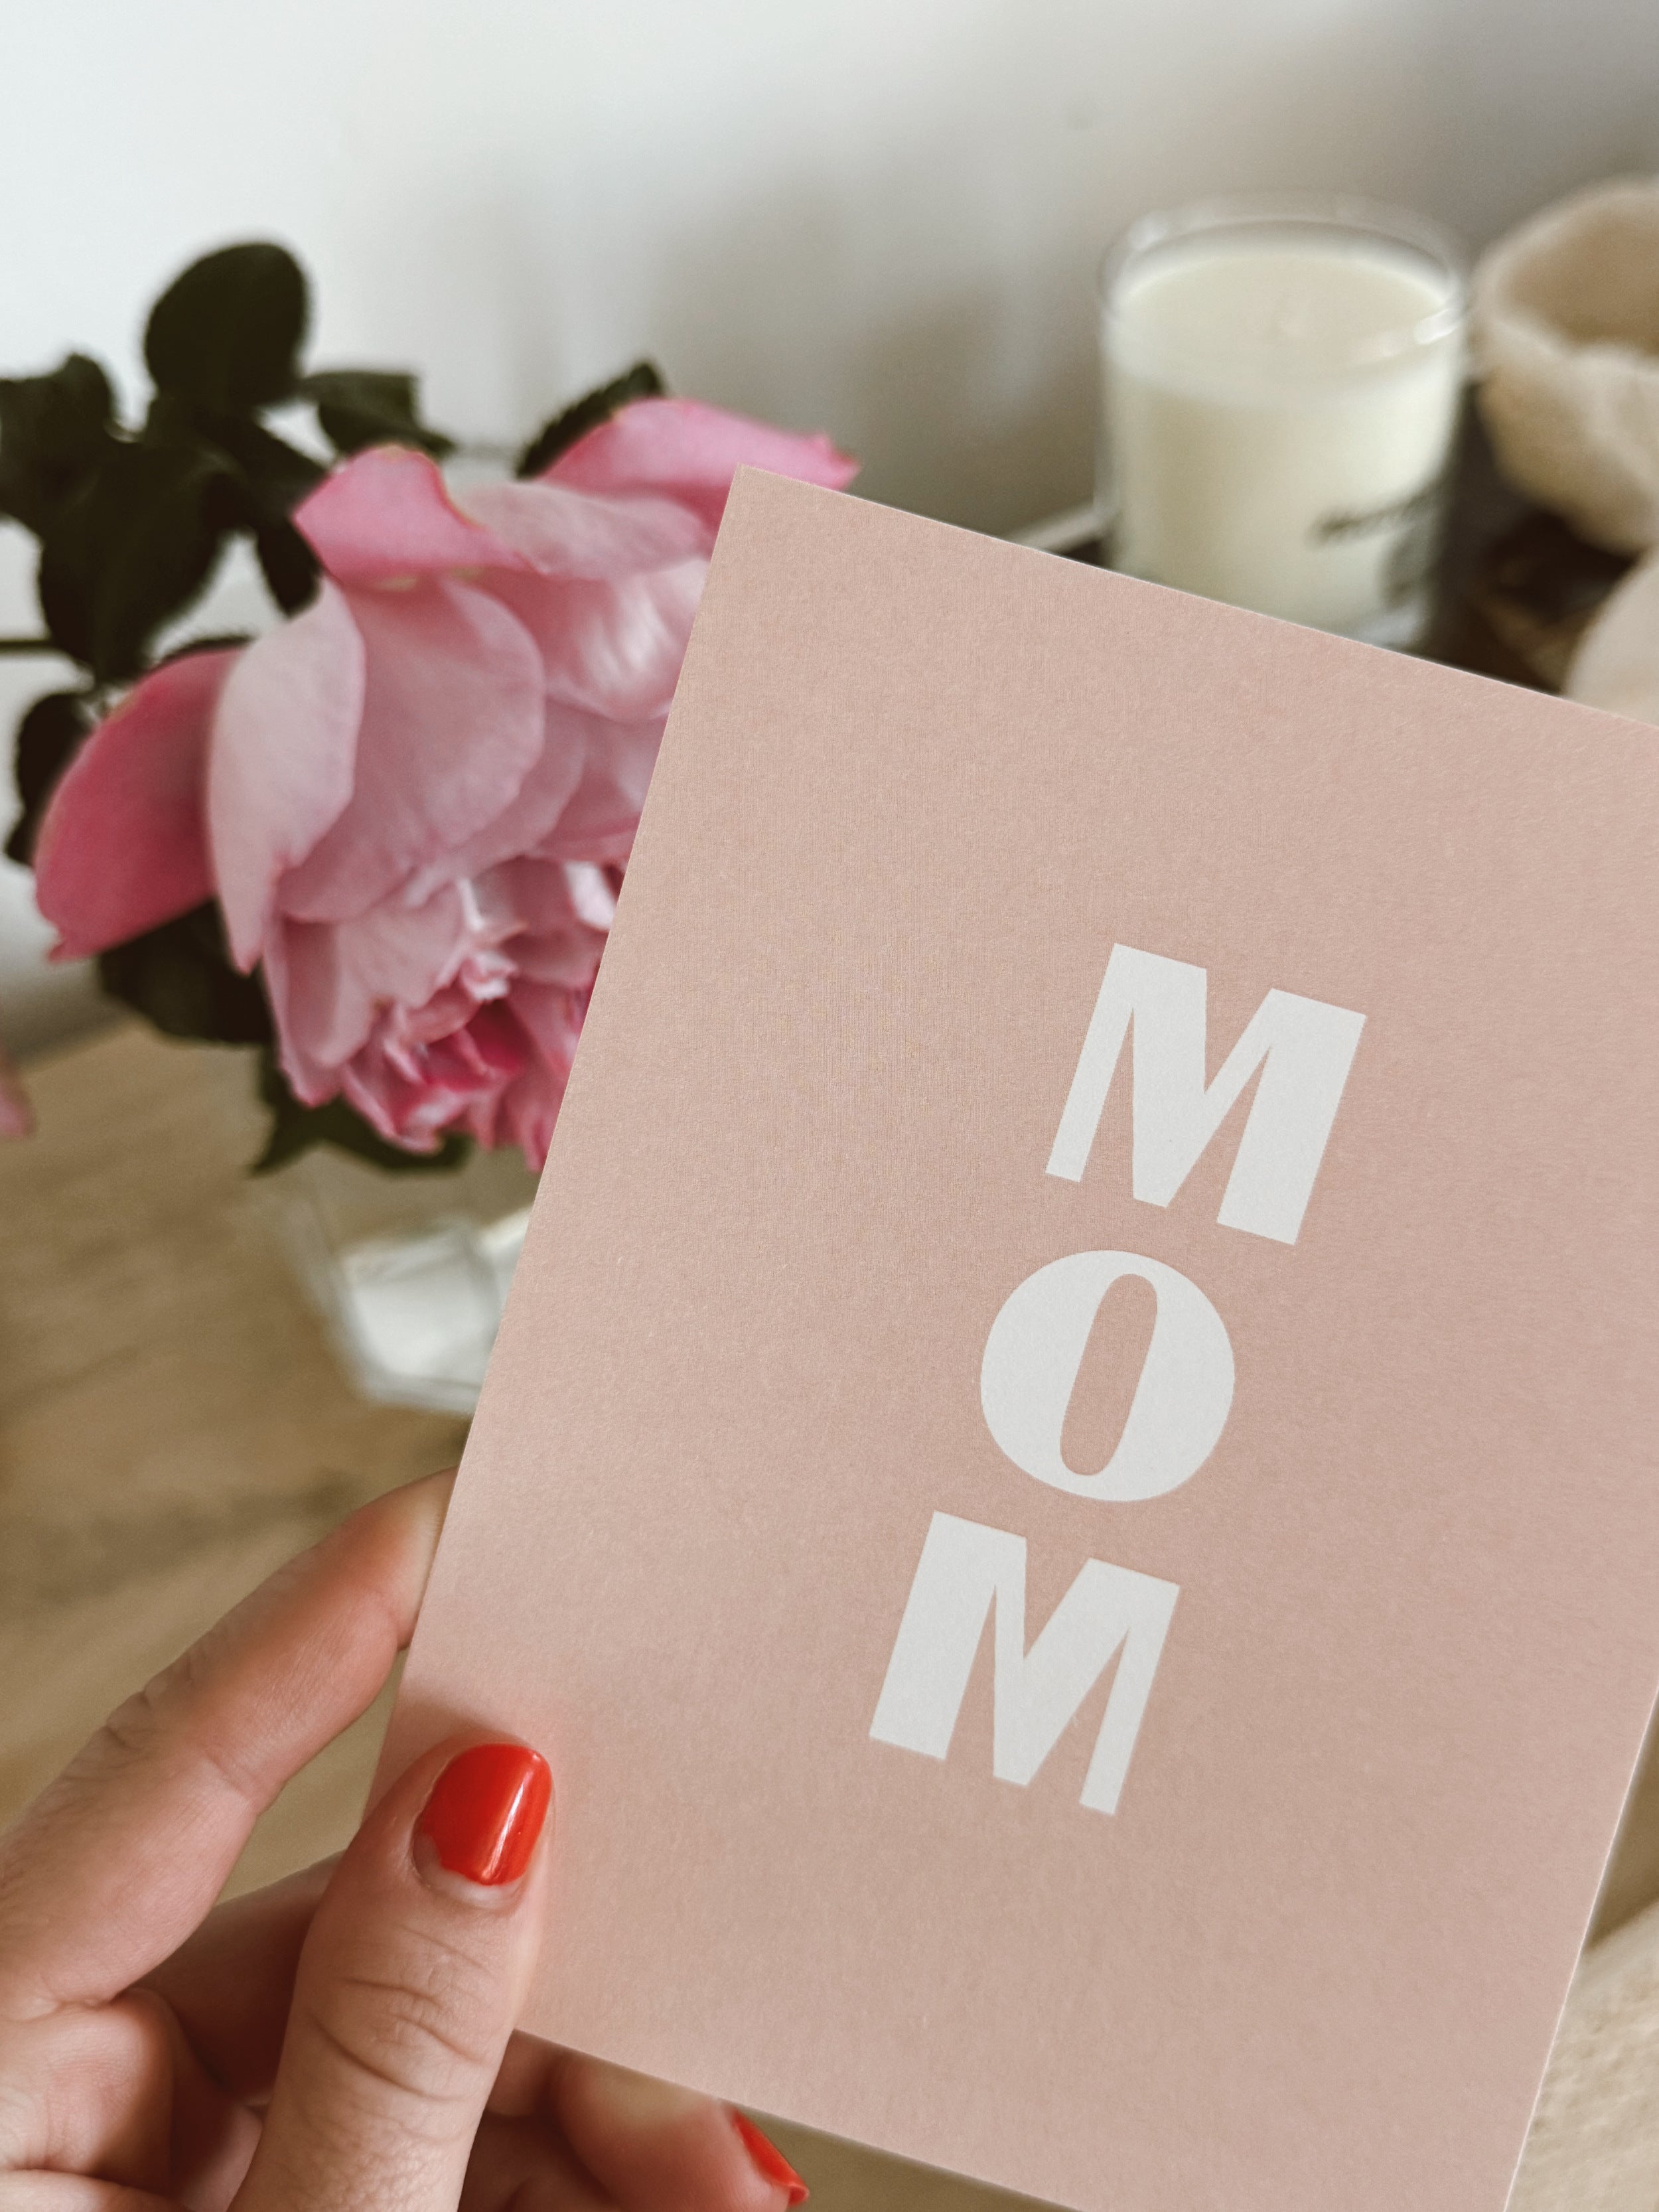 This Week's Custom Mother's Day Gift Ideas